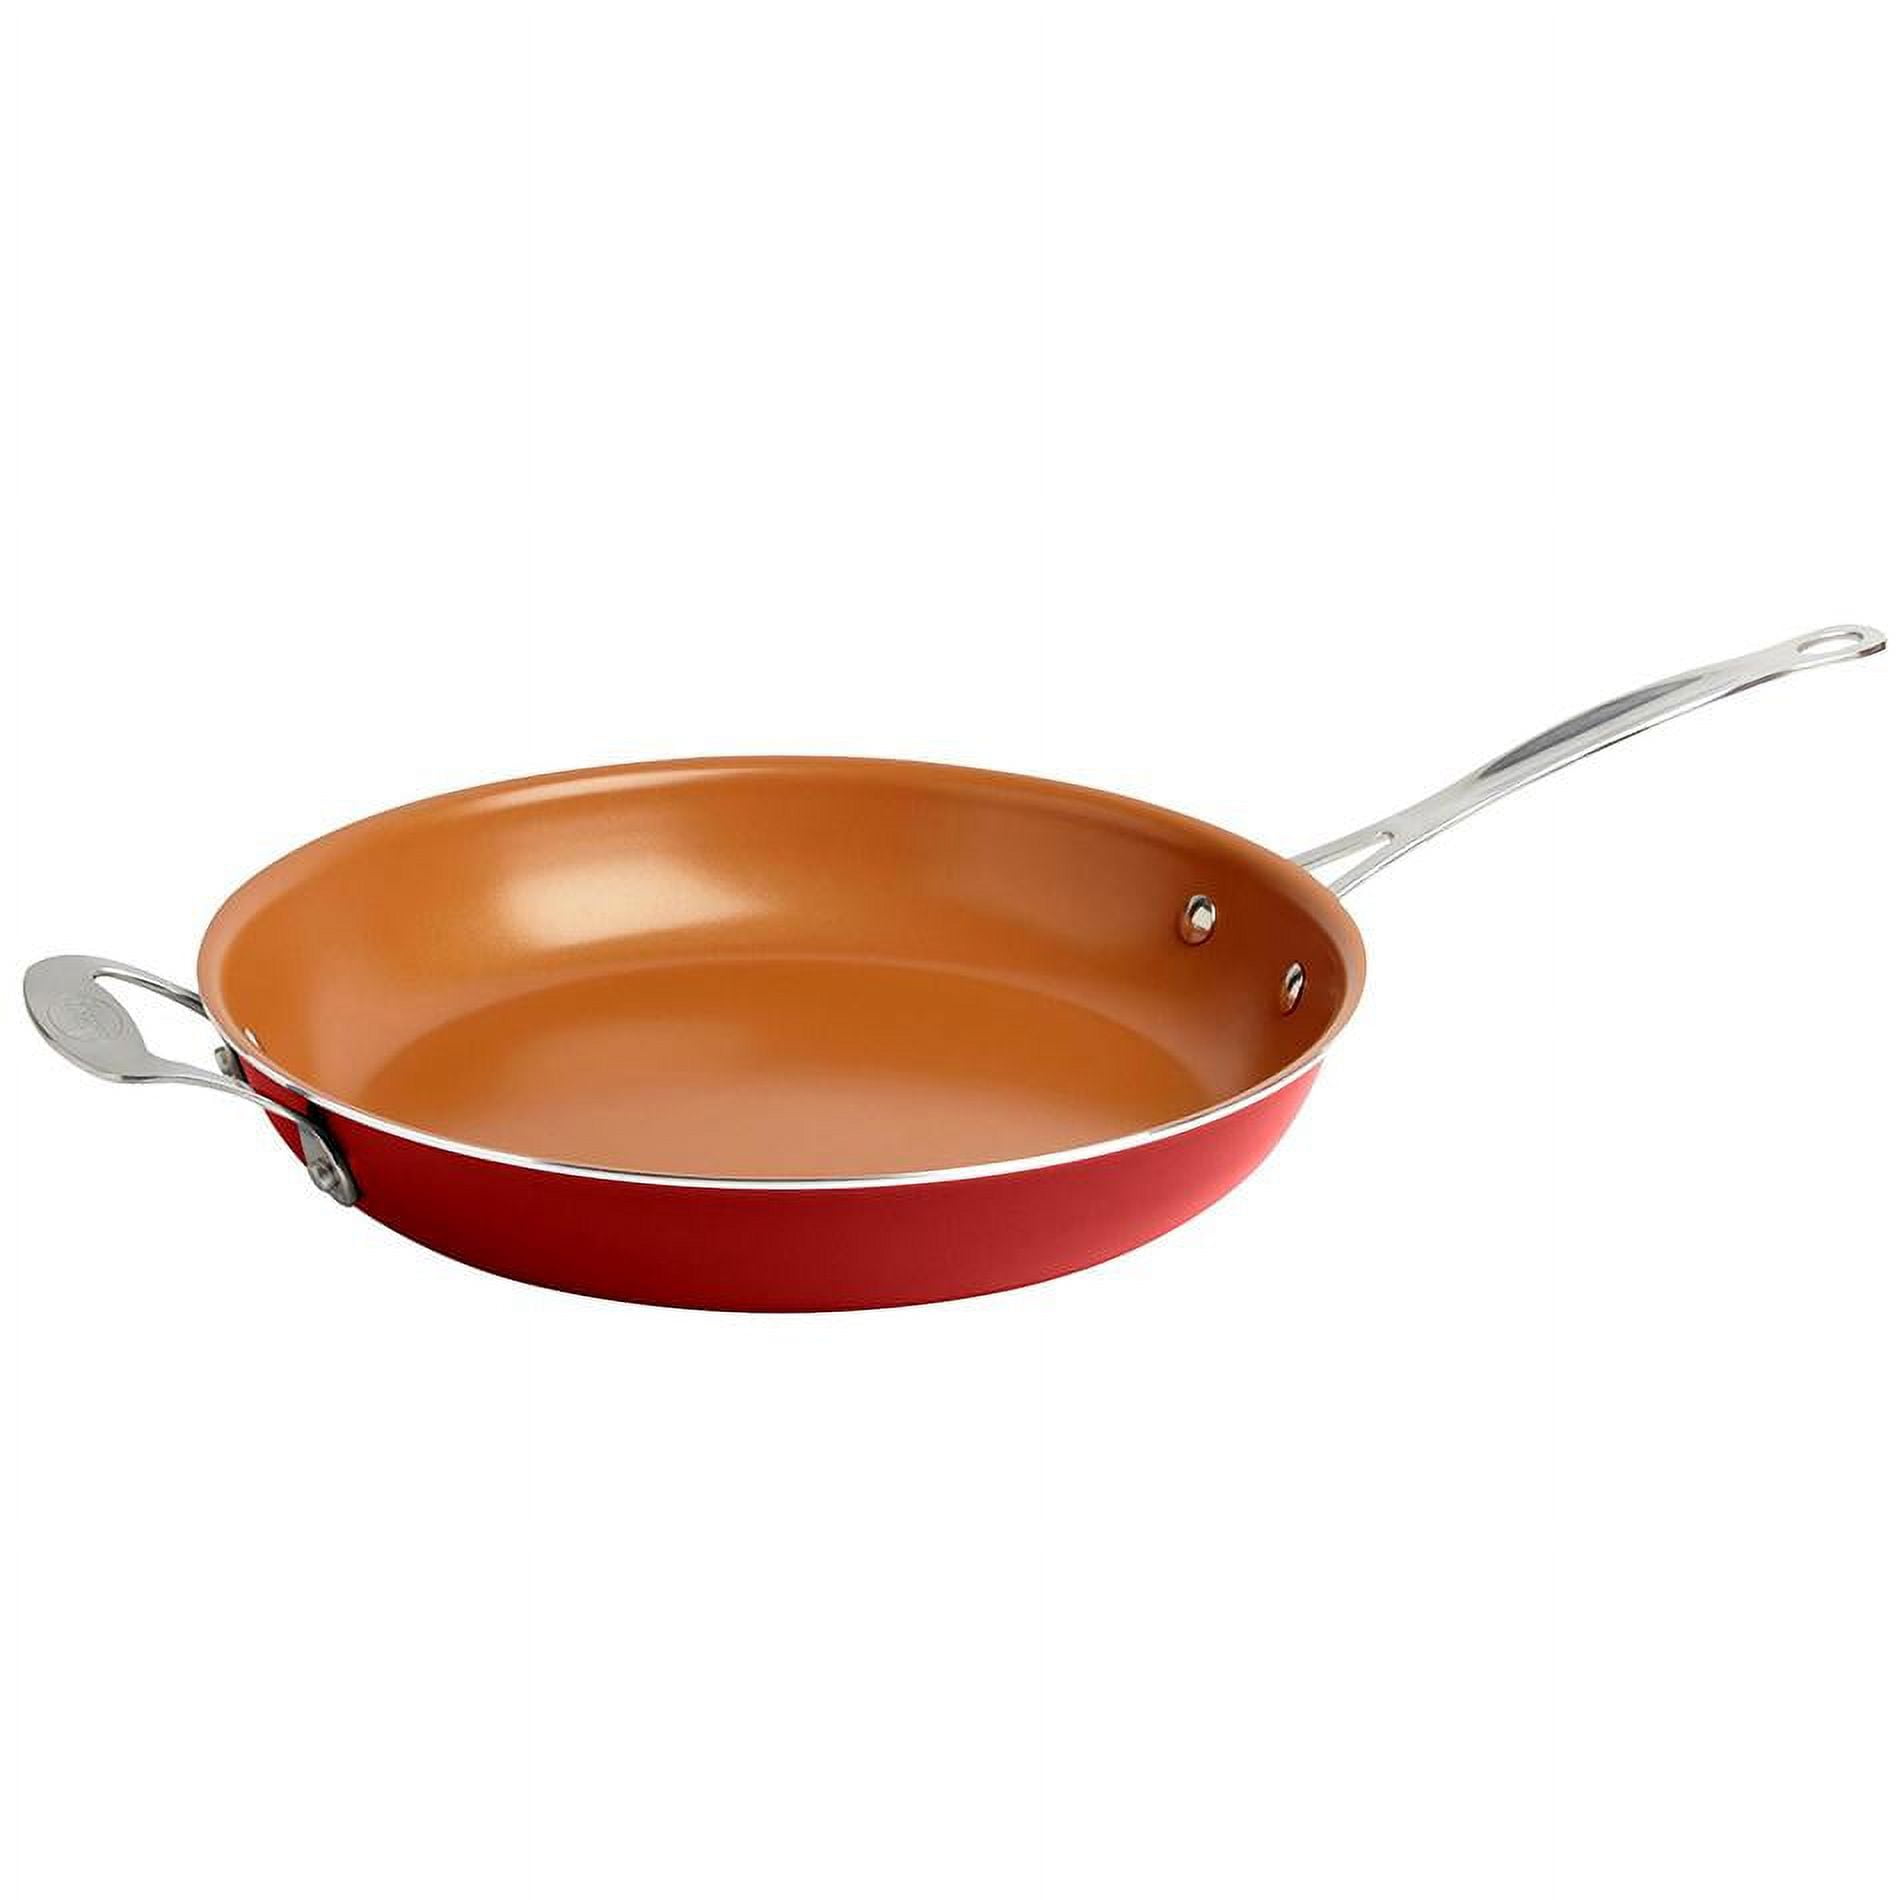 2 Red Copper Square Dance Nonstick Frying Cookware Non Stick Ceramic Fry Pan  for sale online